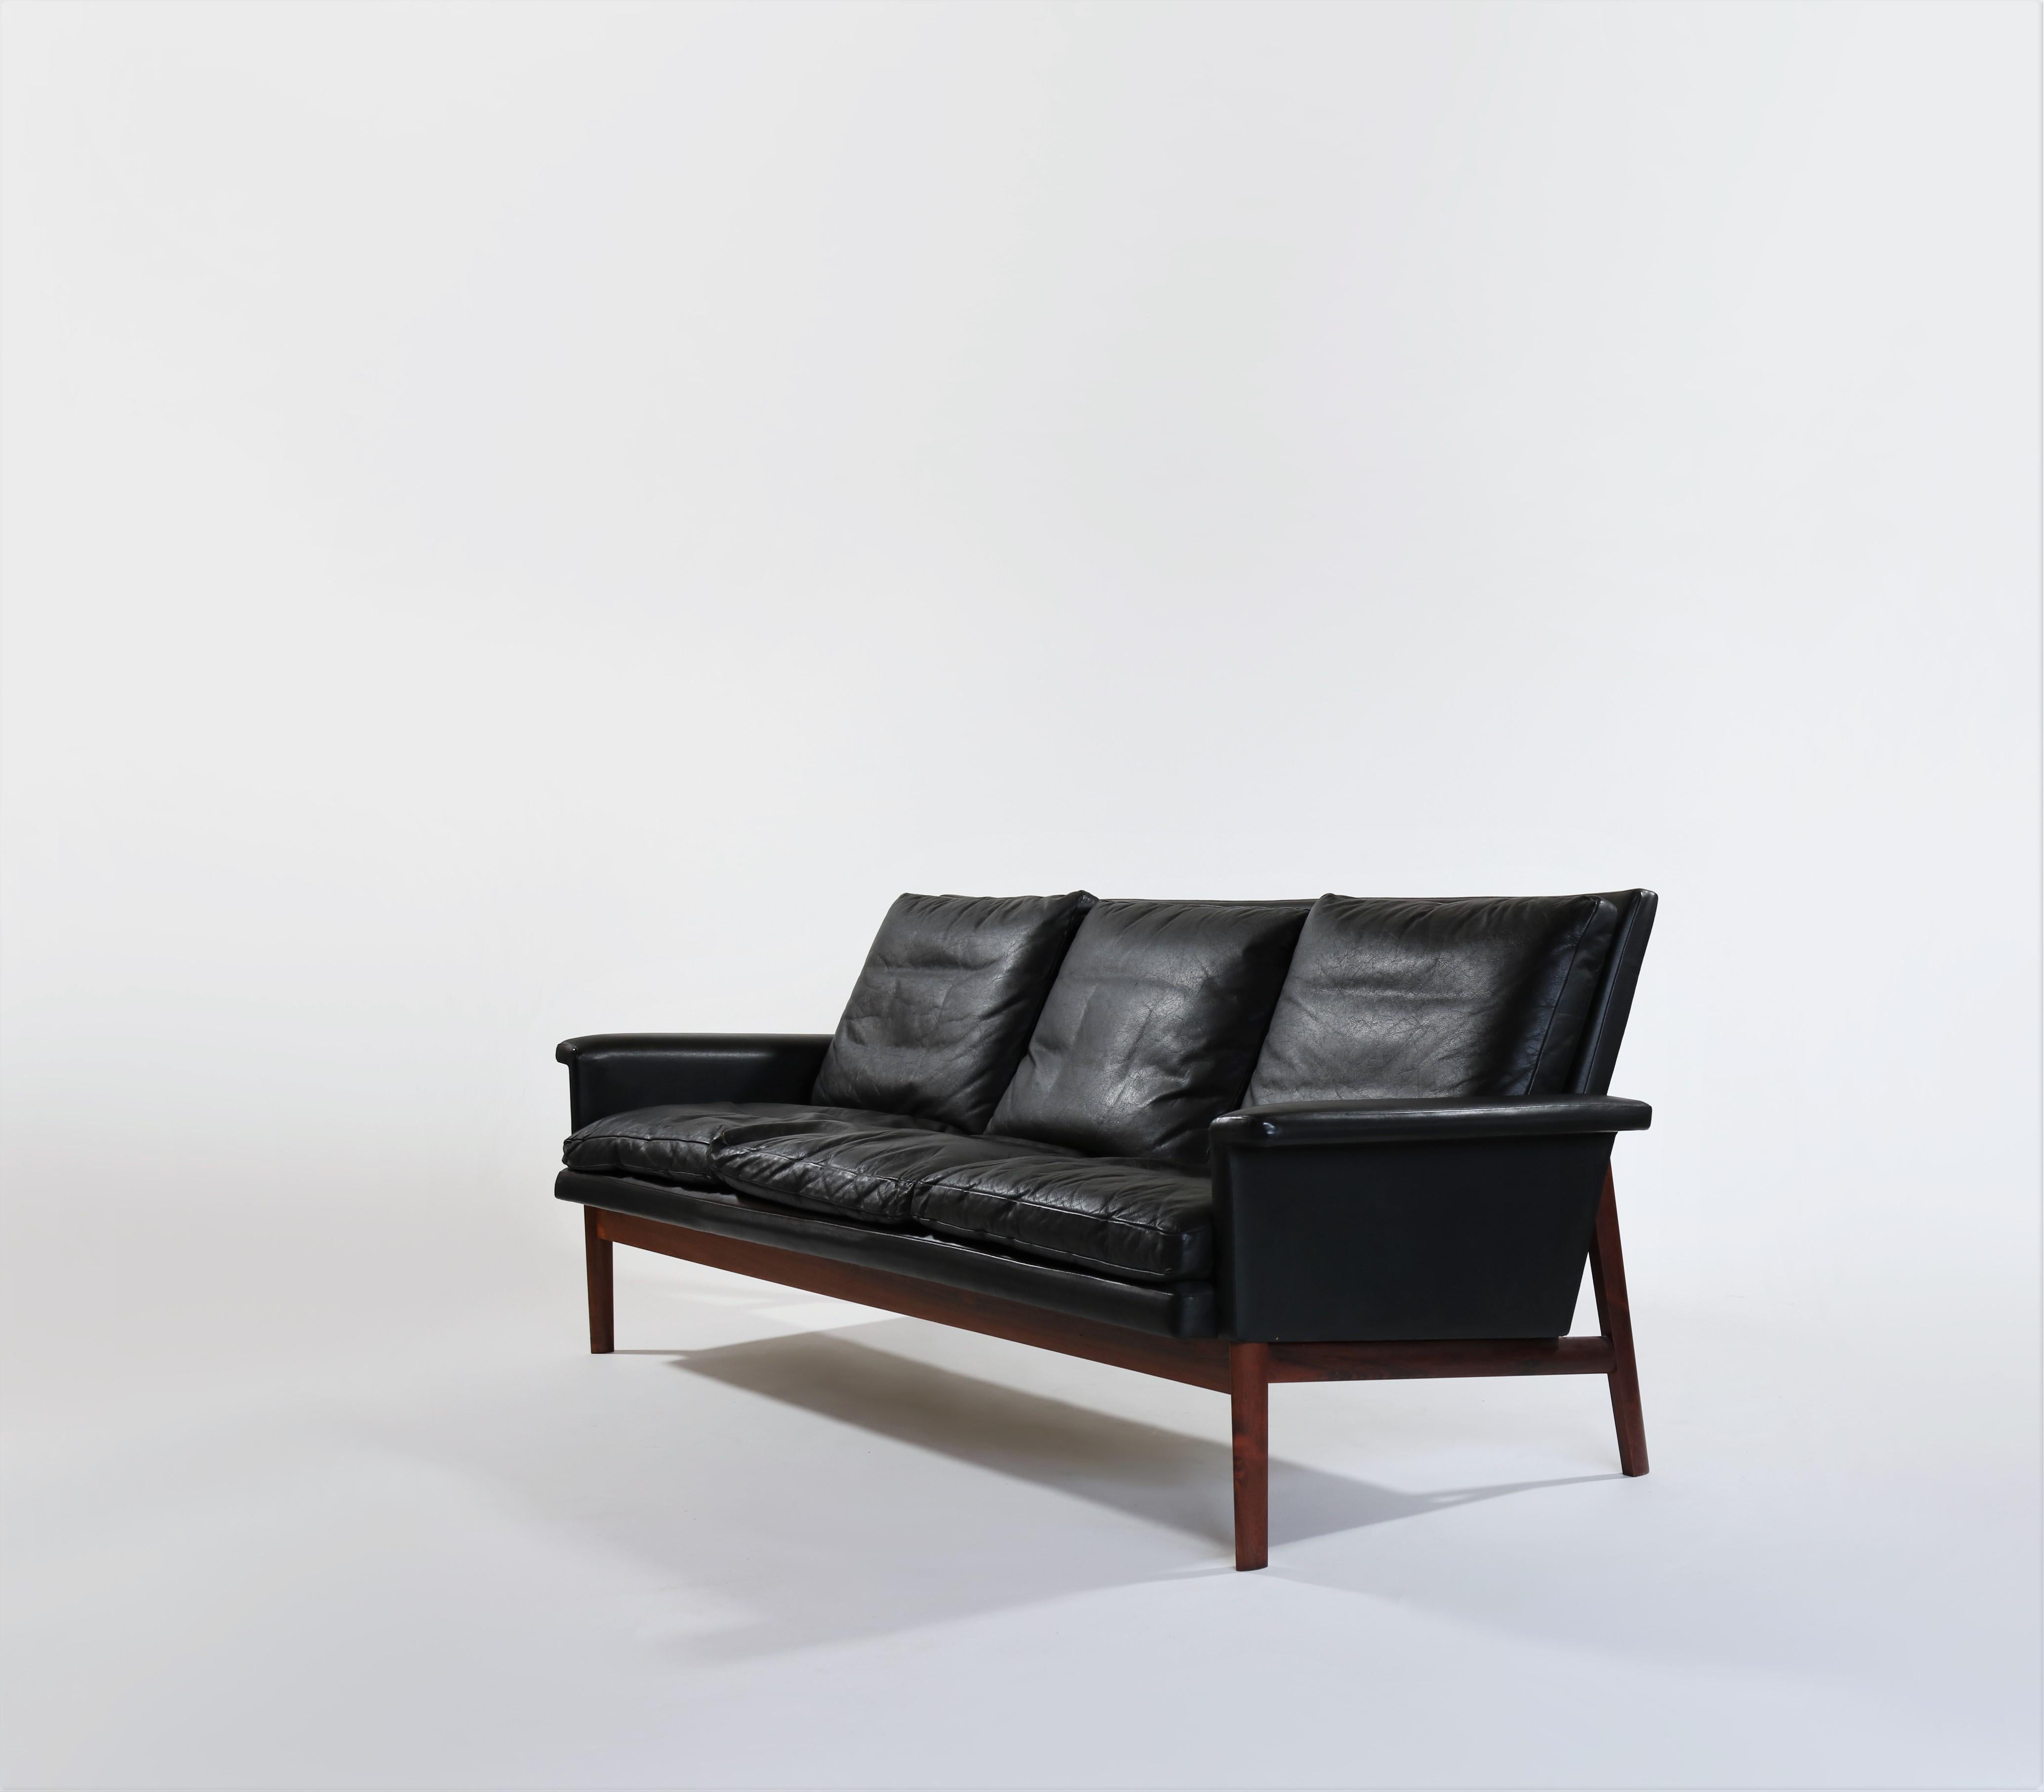 Rare & Elegant Finn Juhl sofa, model no 218 “Jupiter” for France & Son, Denmark. Designed in 1965 and manufactured in the late 1960s. The base is made of solid rosewood and the upholstery in black leather. The sofa is in great vintage condition with